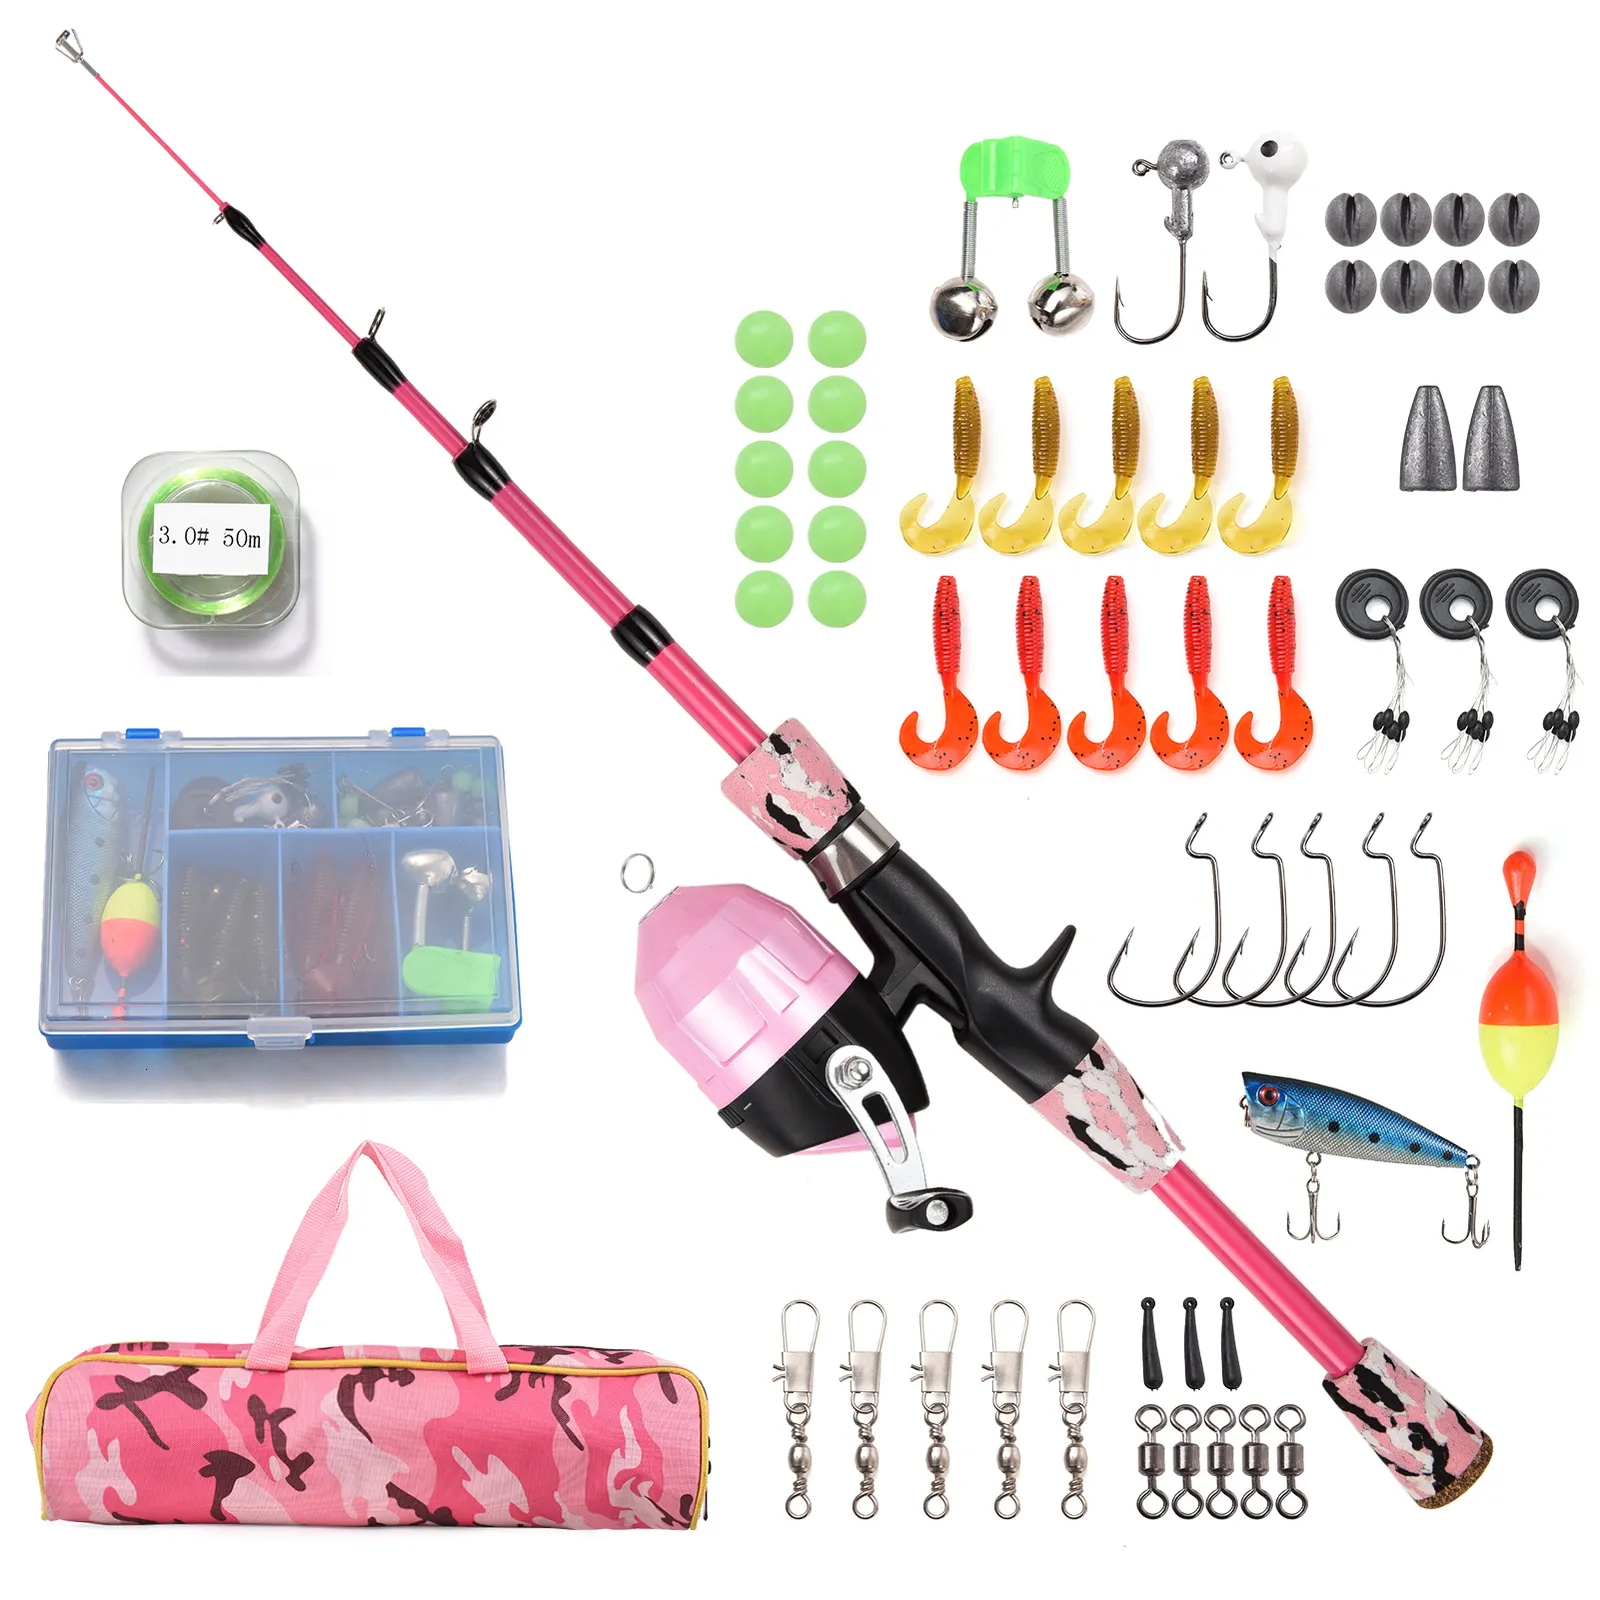 Boat Fishing Rods Kids Rod And Reel Combo Full Kit 1.2m 1.5m Telescopic  Casting Pole With Spincast Hooks Lures Swivels Bag L230822 From Ren06,  $14.2